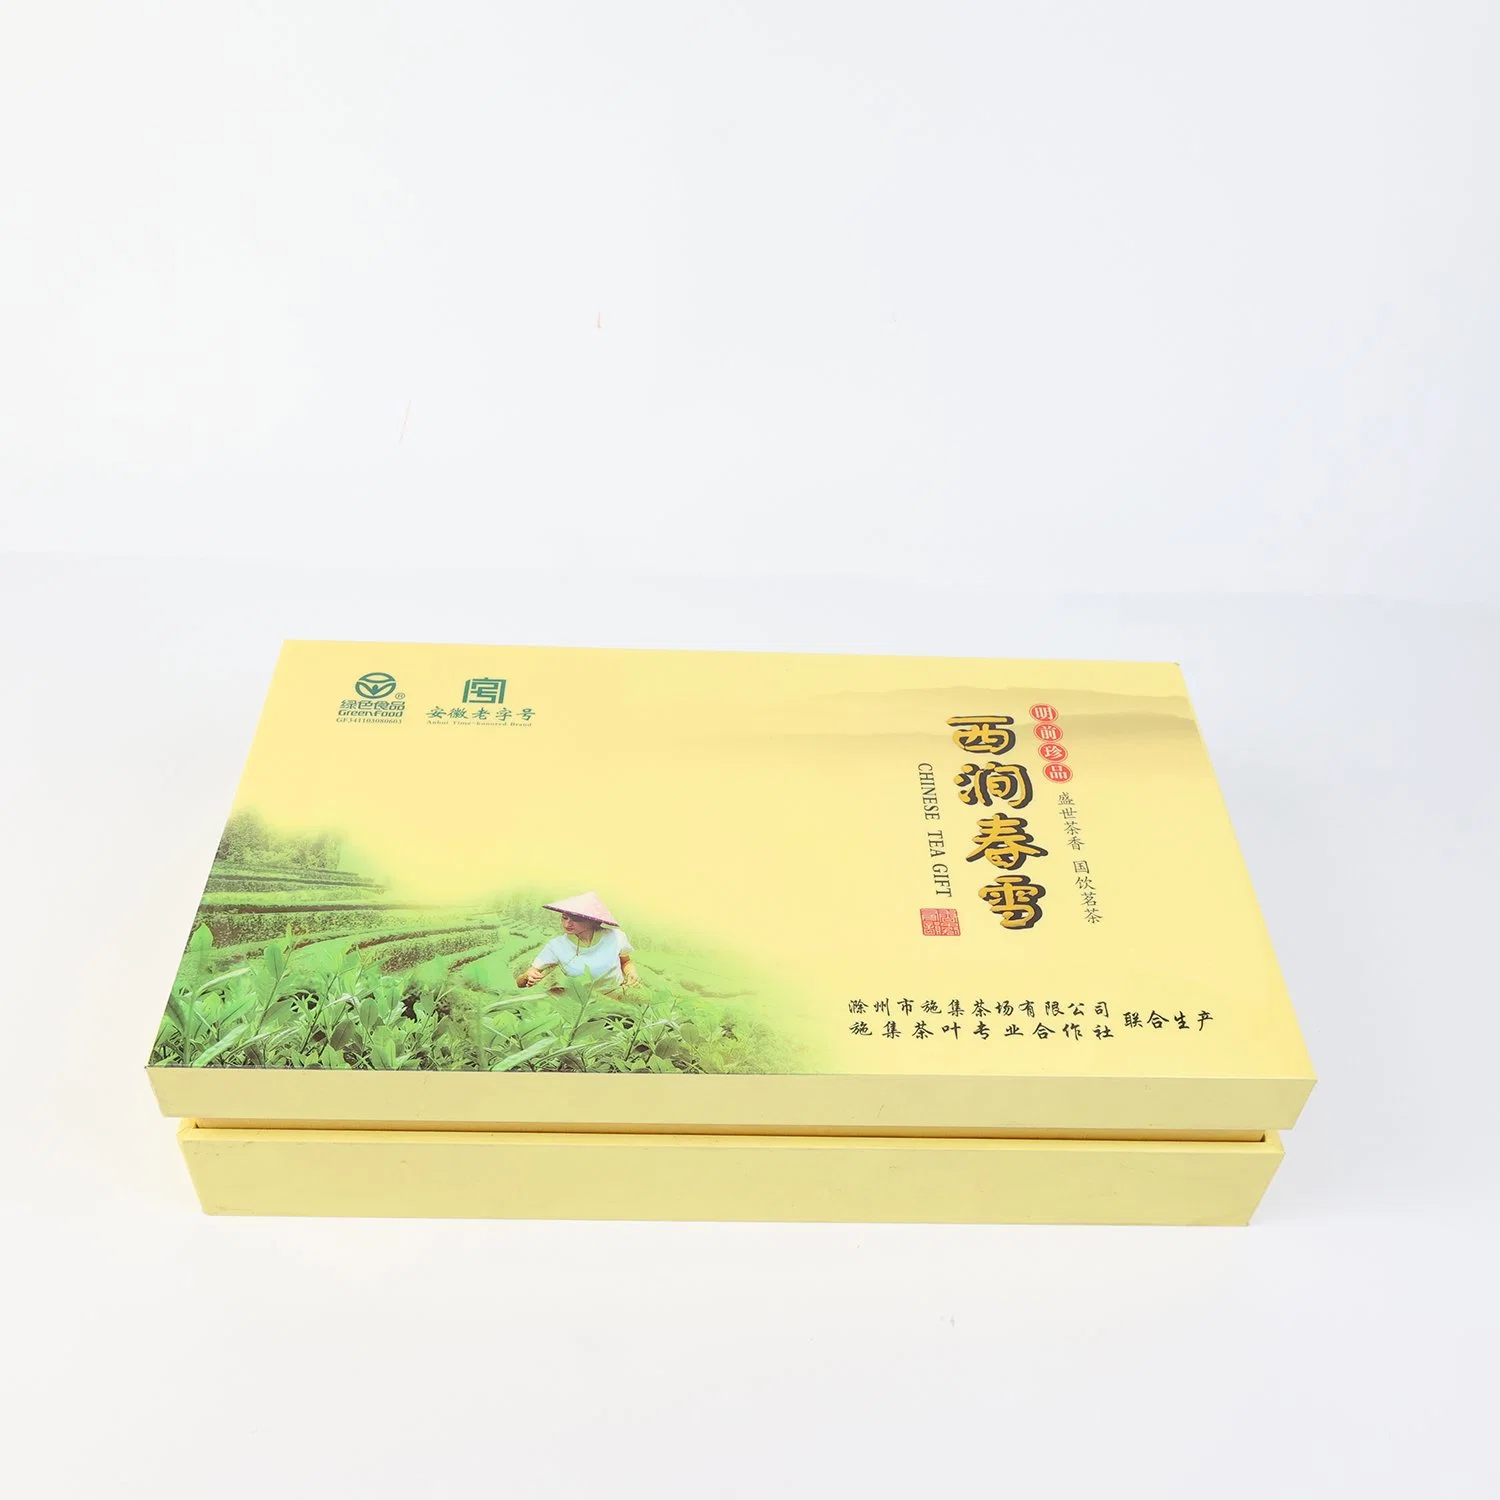 Crystal Porcelain Surface Finishing Thick Paper Packaging Box for Tea Gift Box Mylh-23060